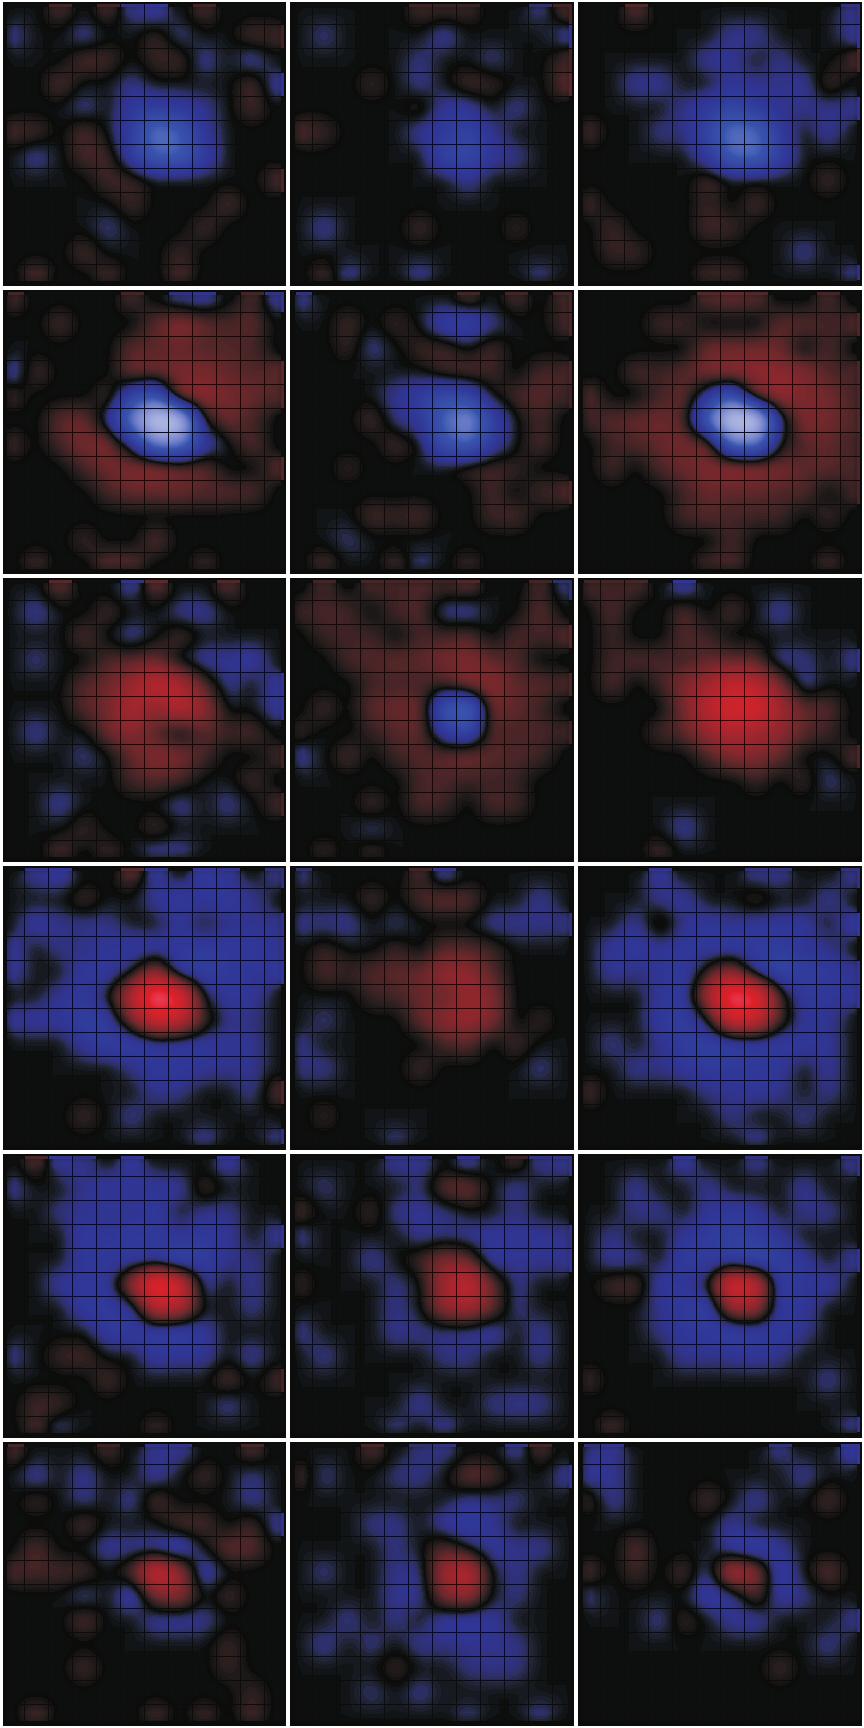 Each panel corresponds to the same region of visual space, 5.2 on a side. On responses are coded in red and off in blue; the brighter the red or blue, the stronger the response.